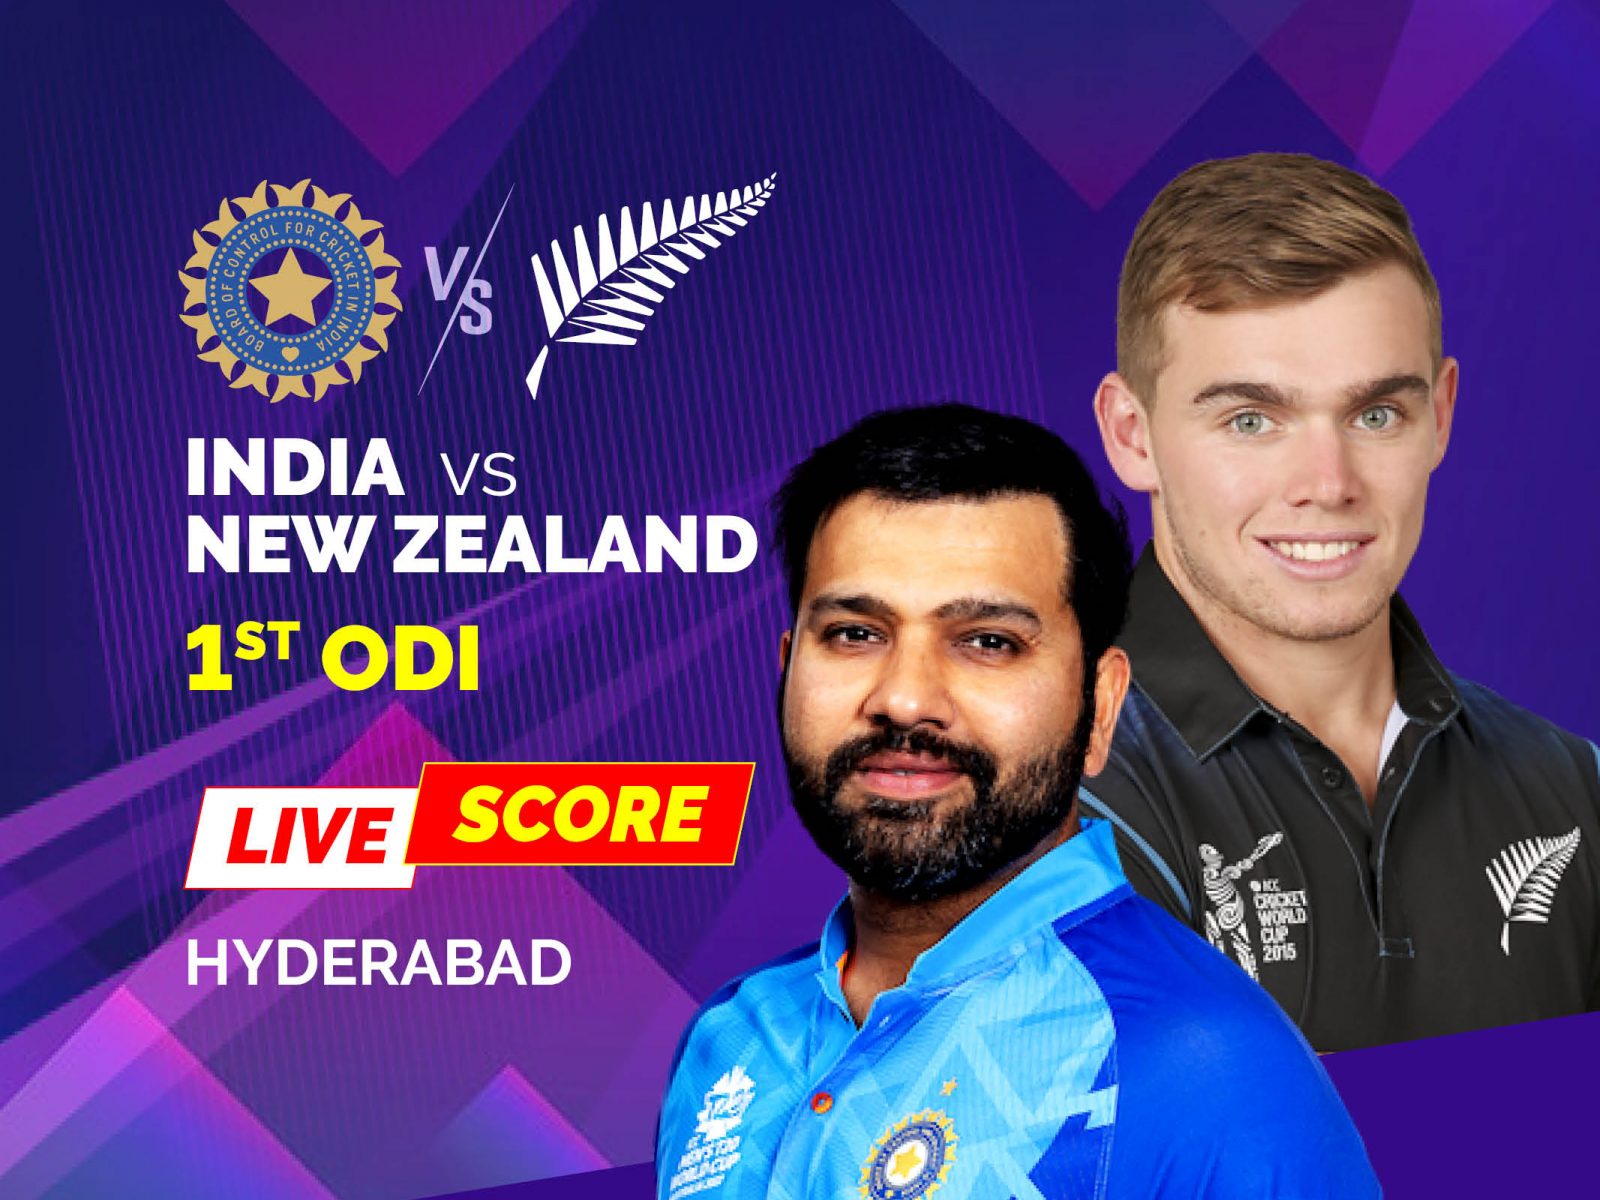 India vs New Zealand Highlights, 1st ODI Latest Updates IND Survive Bracewell Scare to Win by 12 Runs in Hyderabad